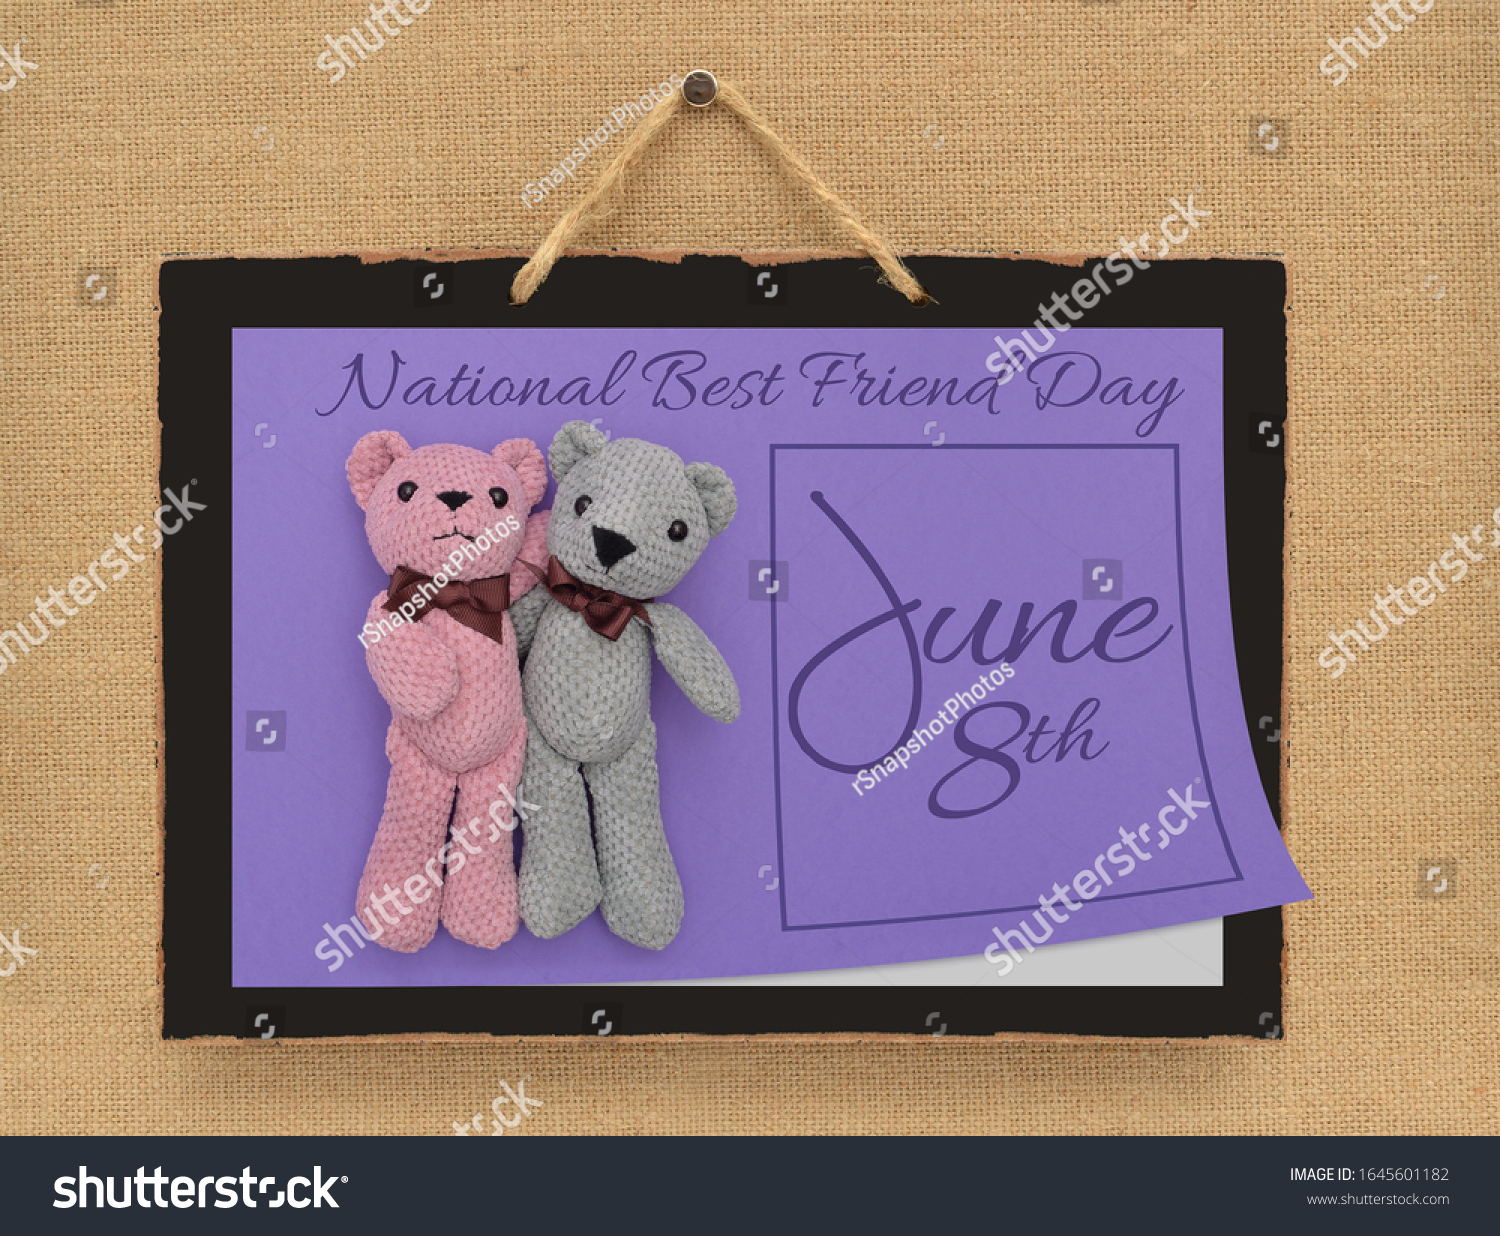 National Best Friend Day June 8 Stock Photo Edit Now 1645601182